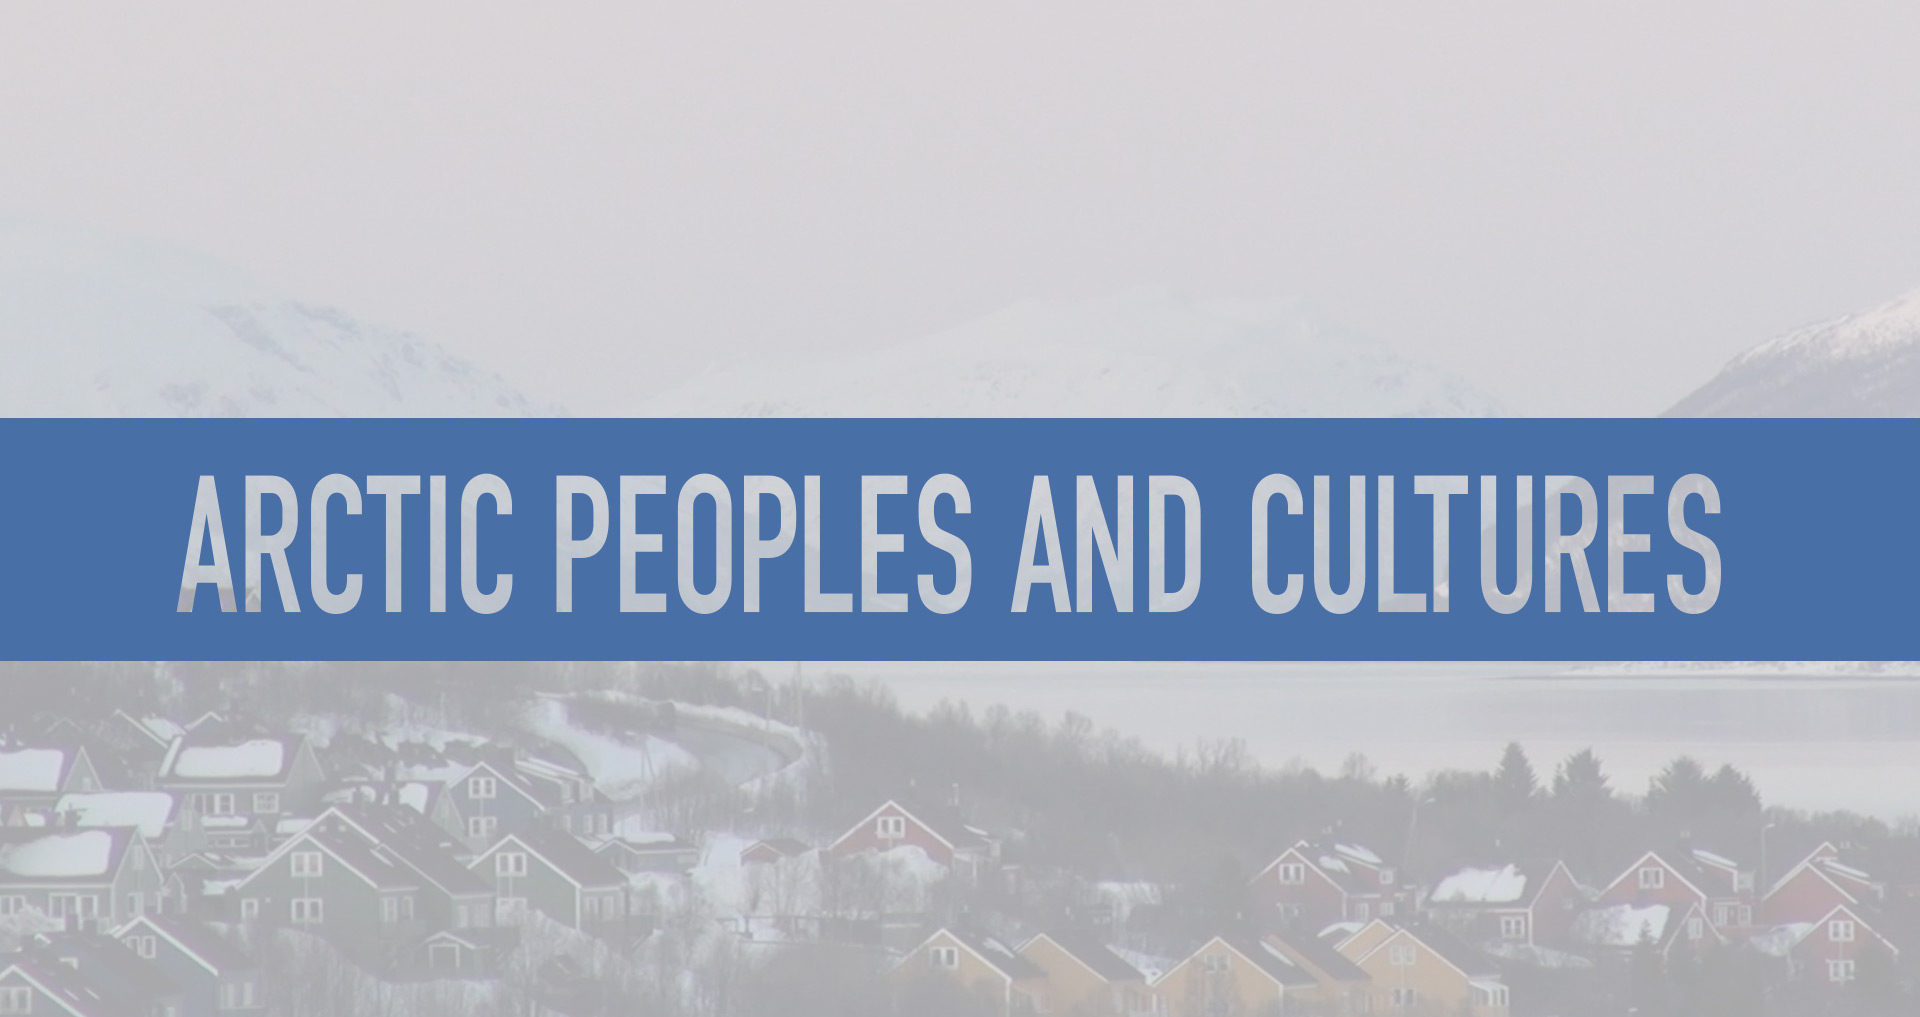 Arctic peoples and cultures online course title card